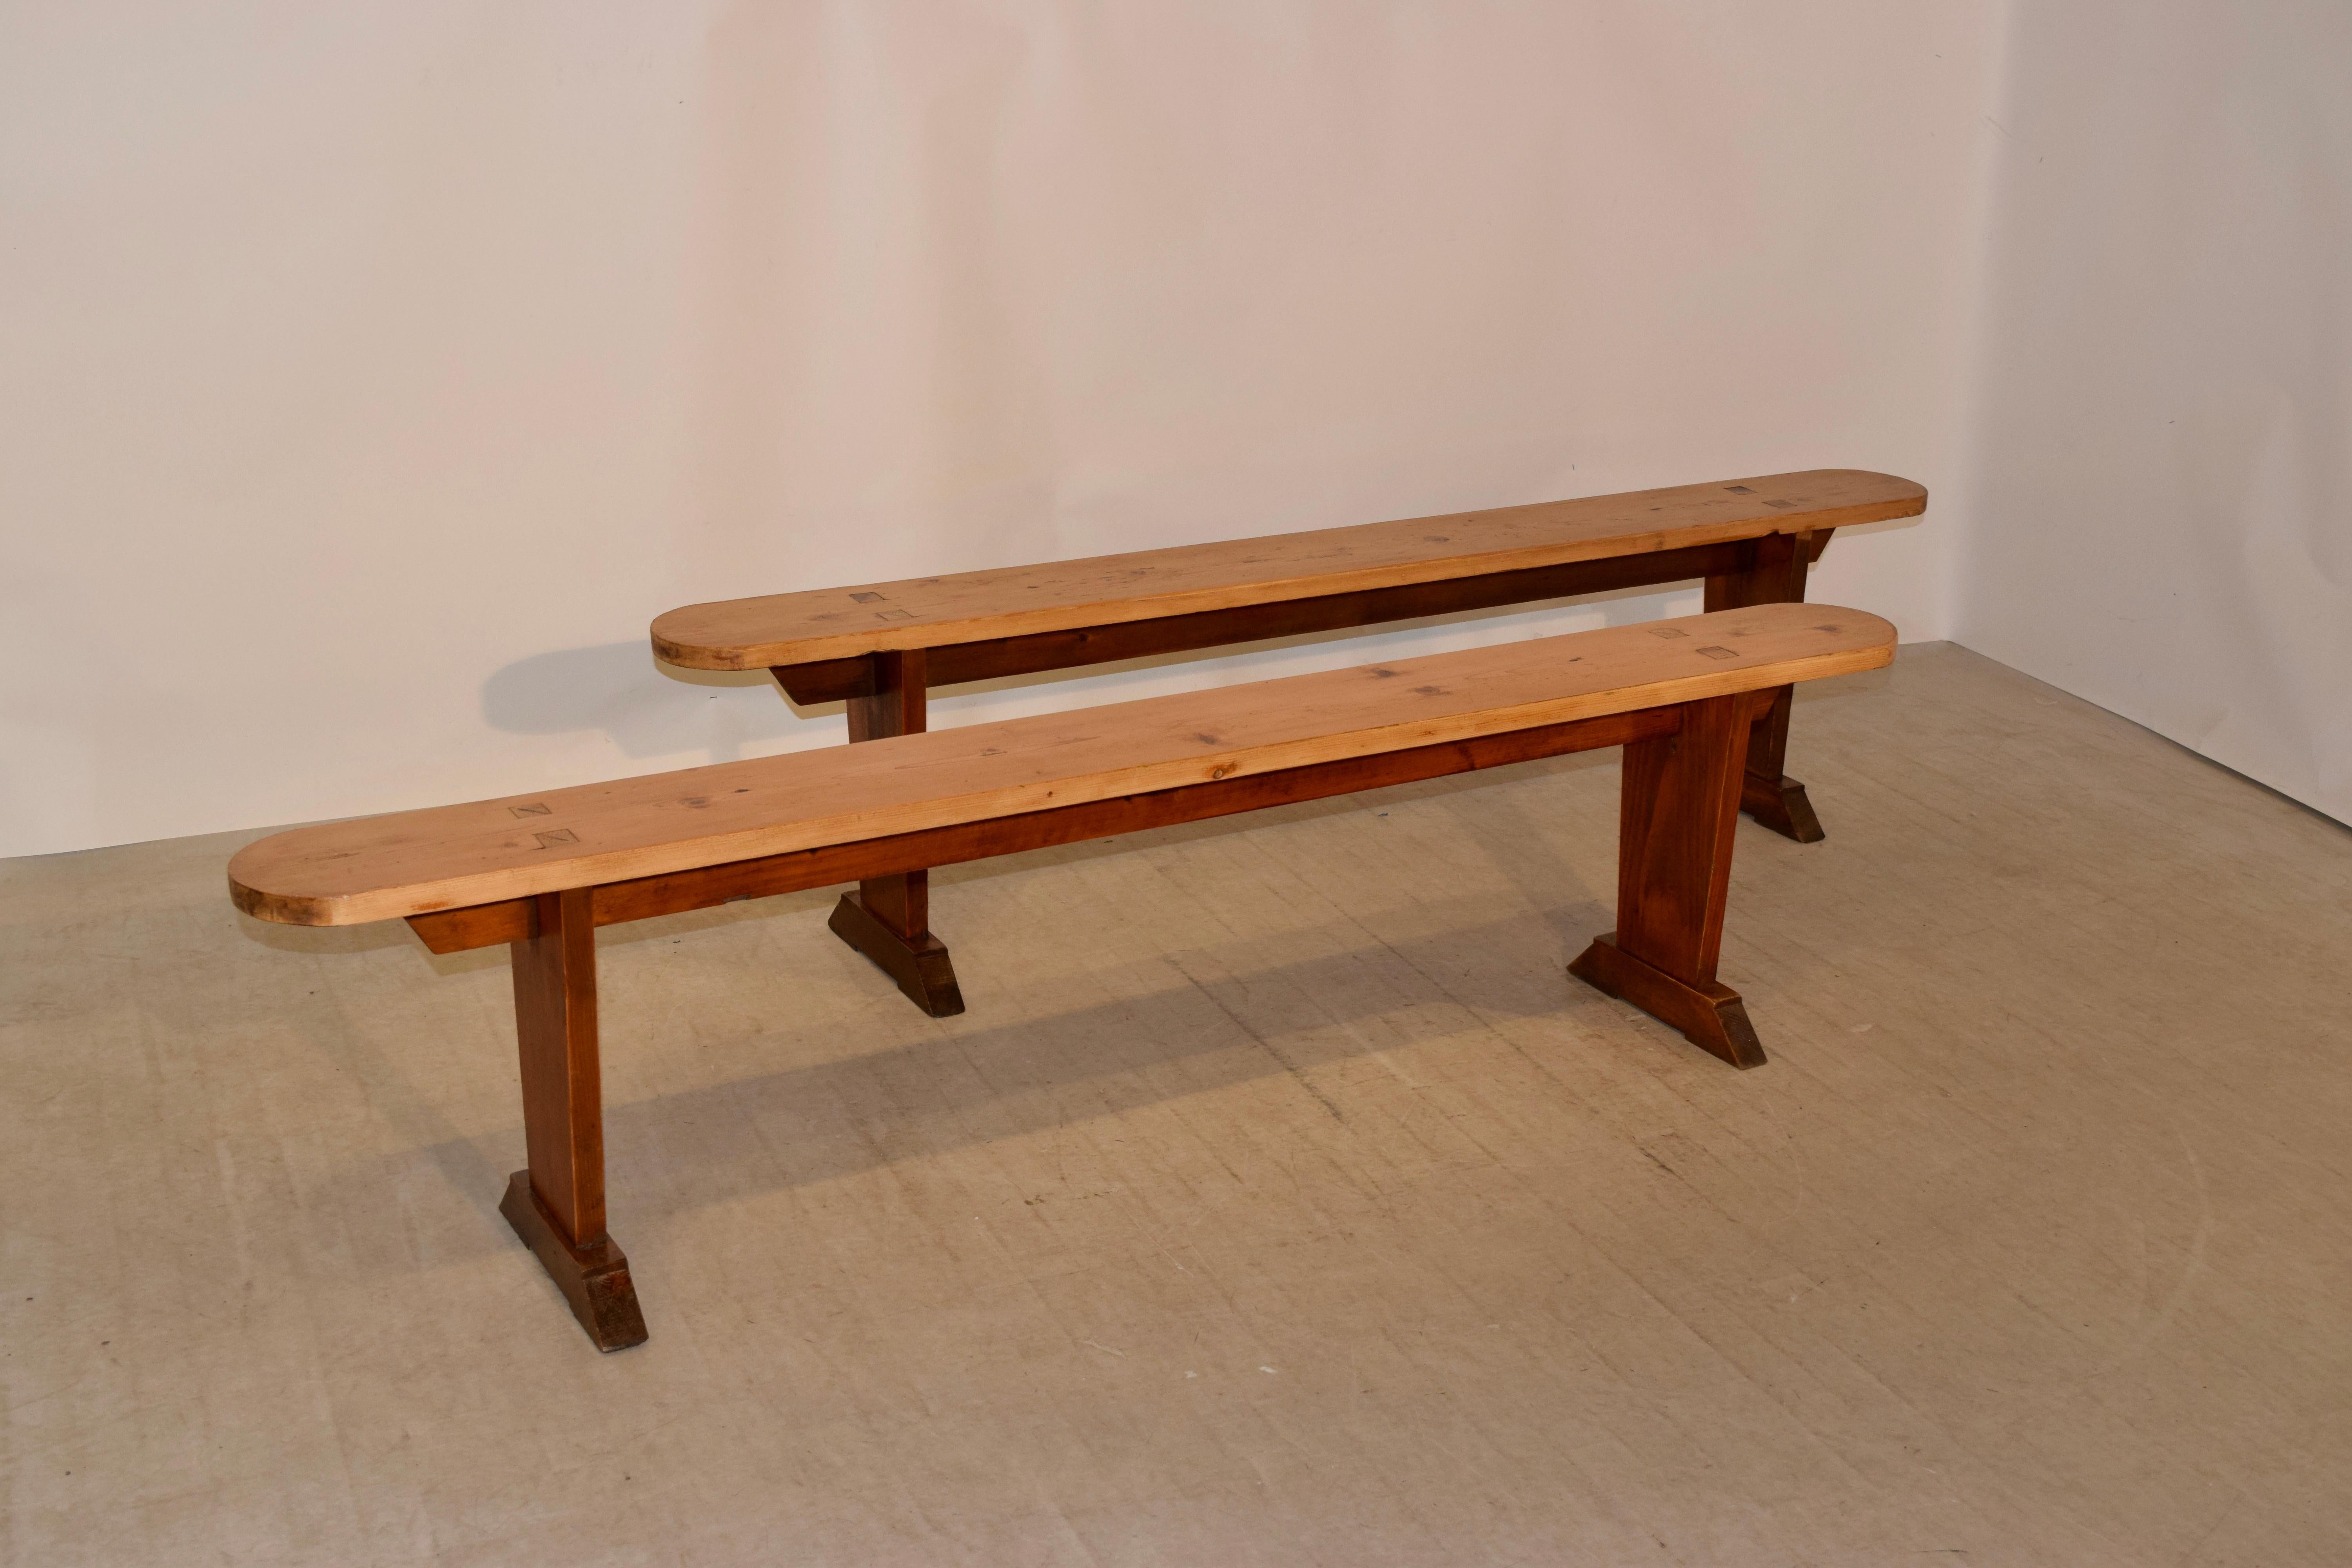 Pair of 19th century pine benches from France with plank seats with rounded ends and pegged construction following down to simple bases with tapered vase type legs.